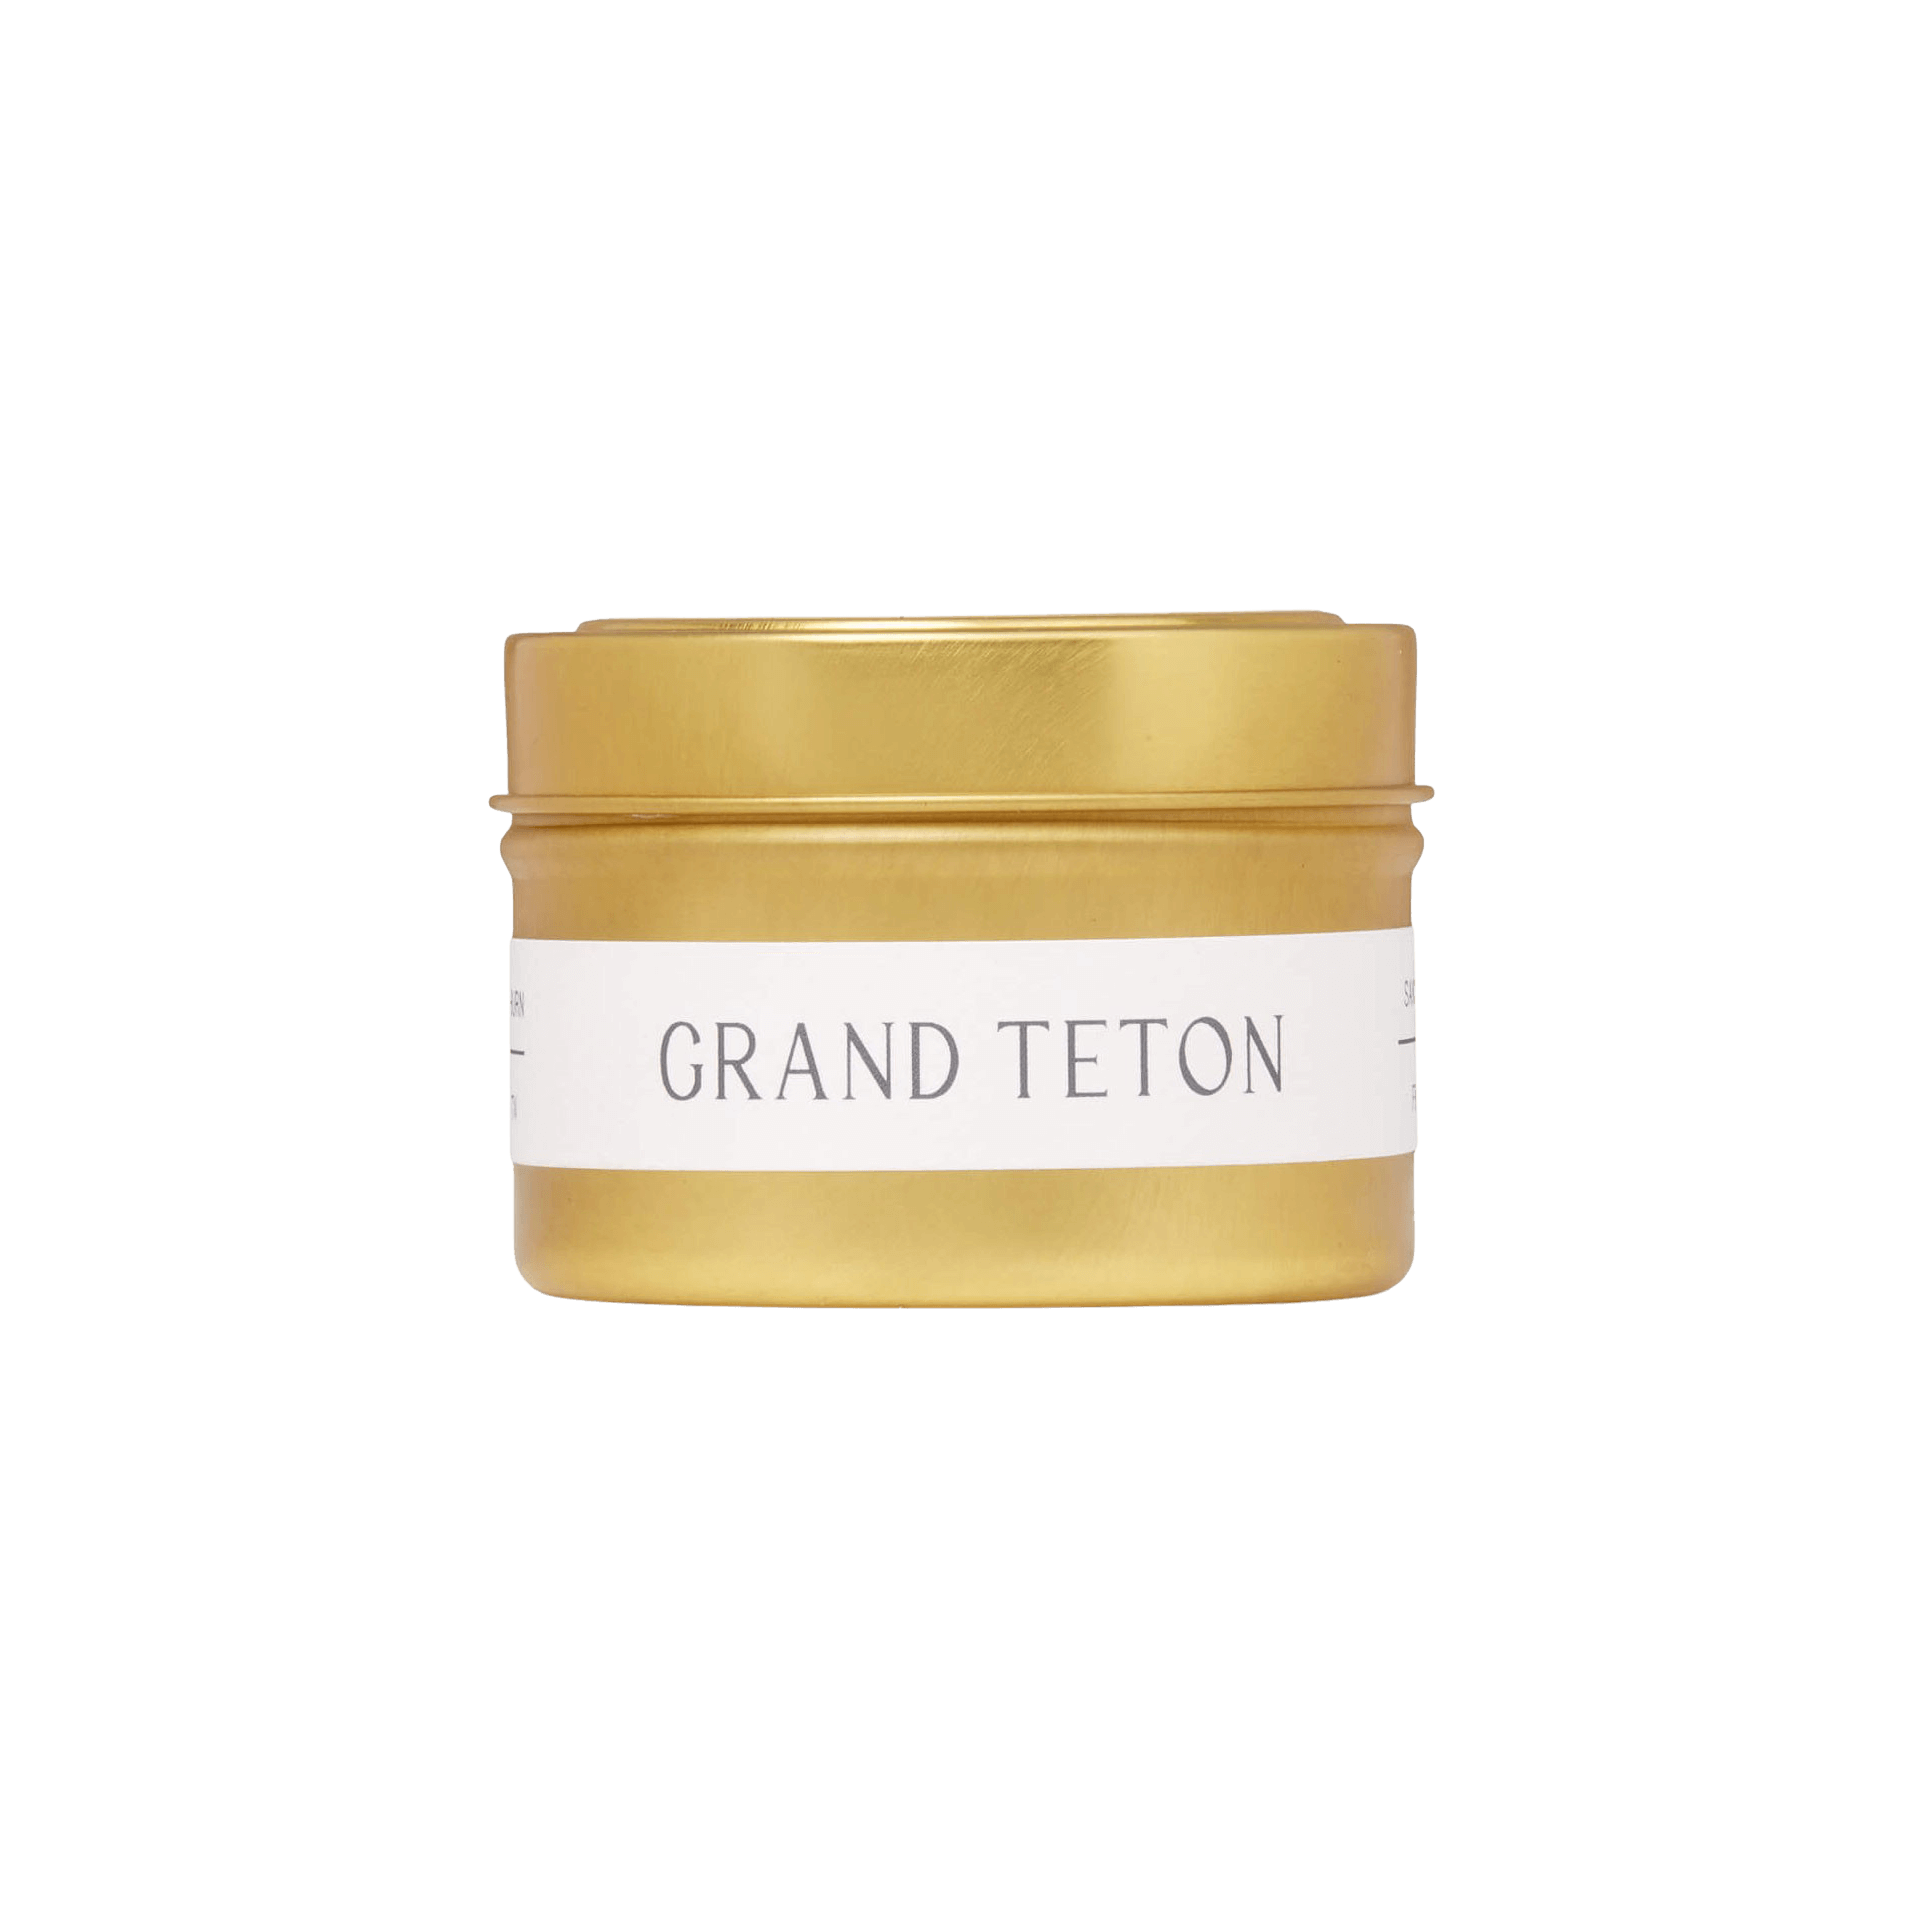 Grand Teton travel candle - the roosevelts candle co